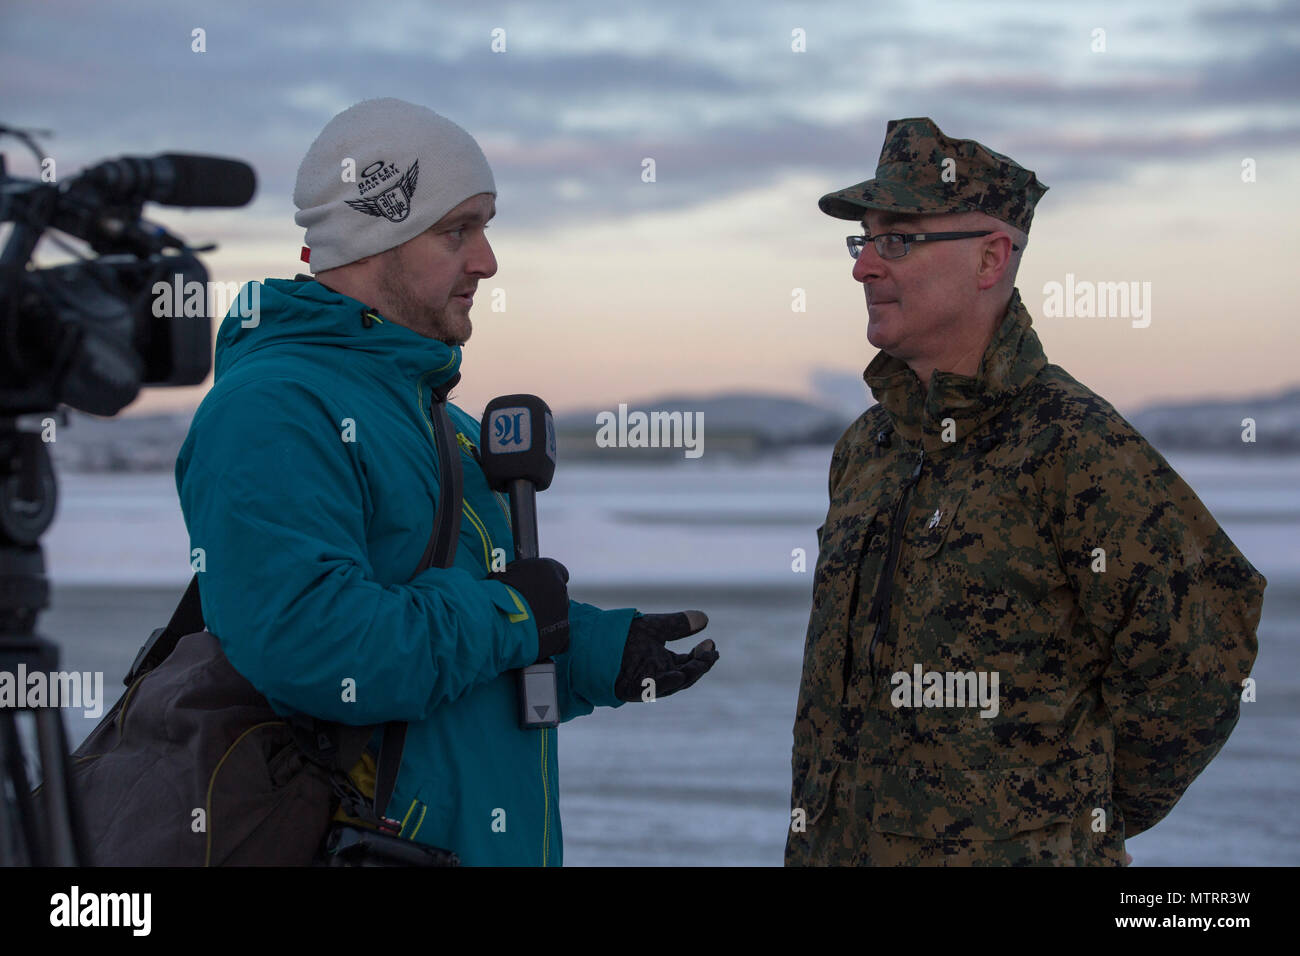 Colonel Doug Brunn talks with a local news station on the tarmac at Vaernes Garnison, Norway, Jan. 16, 2017. The U.S. Marines with Black Sea Rotational Force 17.1 arrived at Vaernes Garnison early in the morning as part of Marine Rotational Force Europe 17.1. (U.S. Marine Corps photo by Lance Cpl. Victoria Ross) Stock Photo